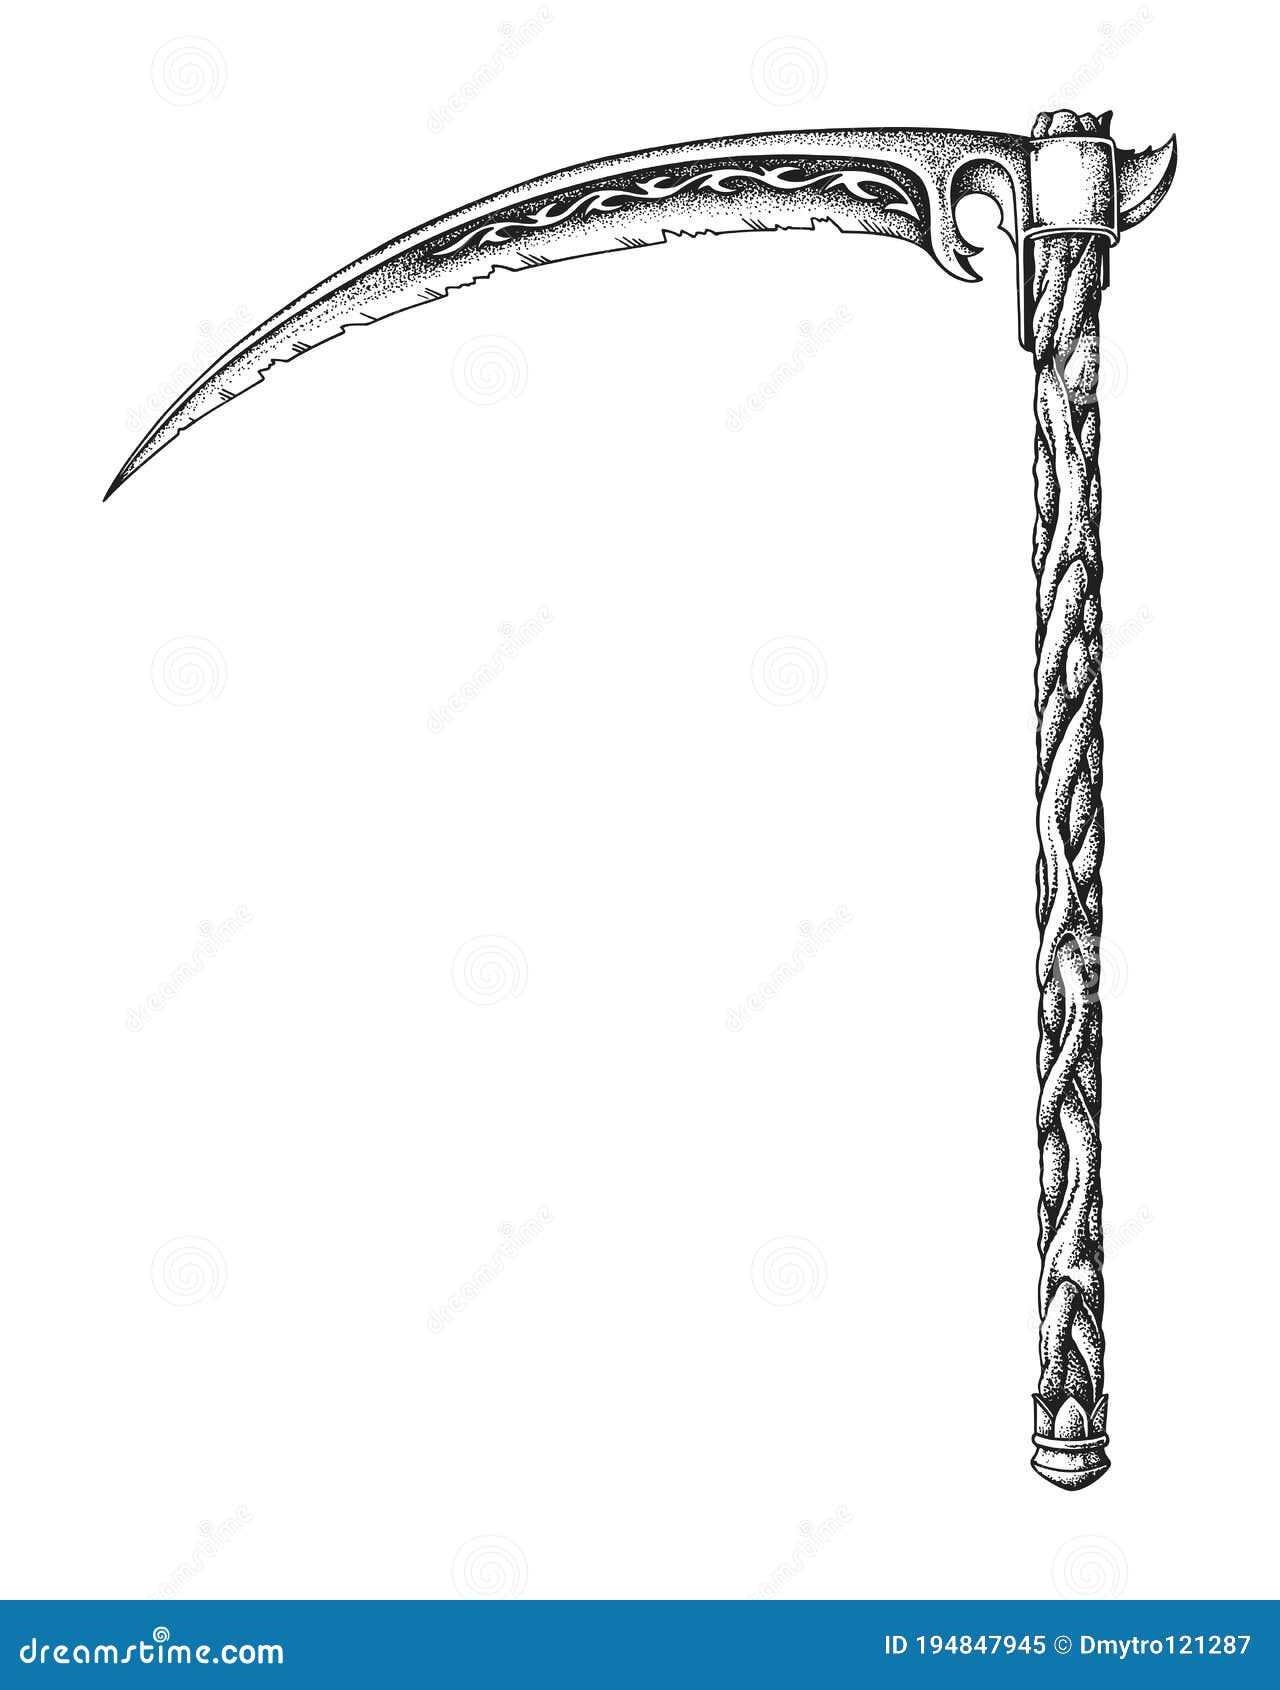 Reaper Scythe  Tattoo sketches Tattoos for guys Tattoo art drawings